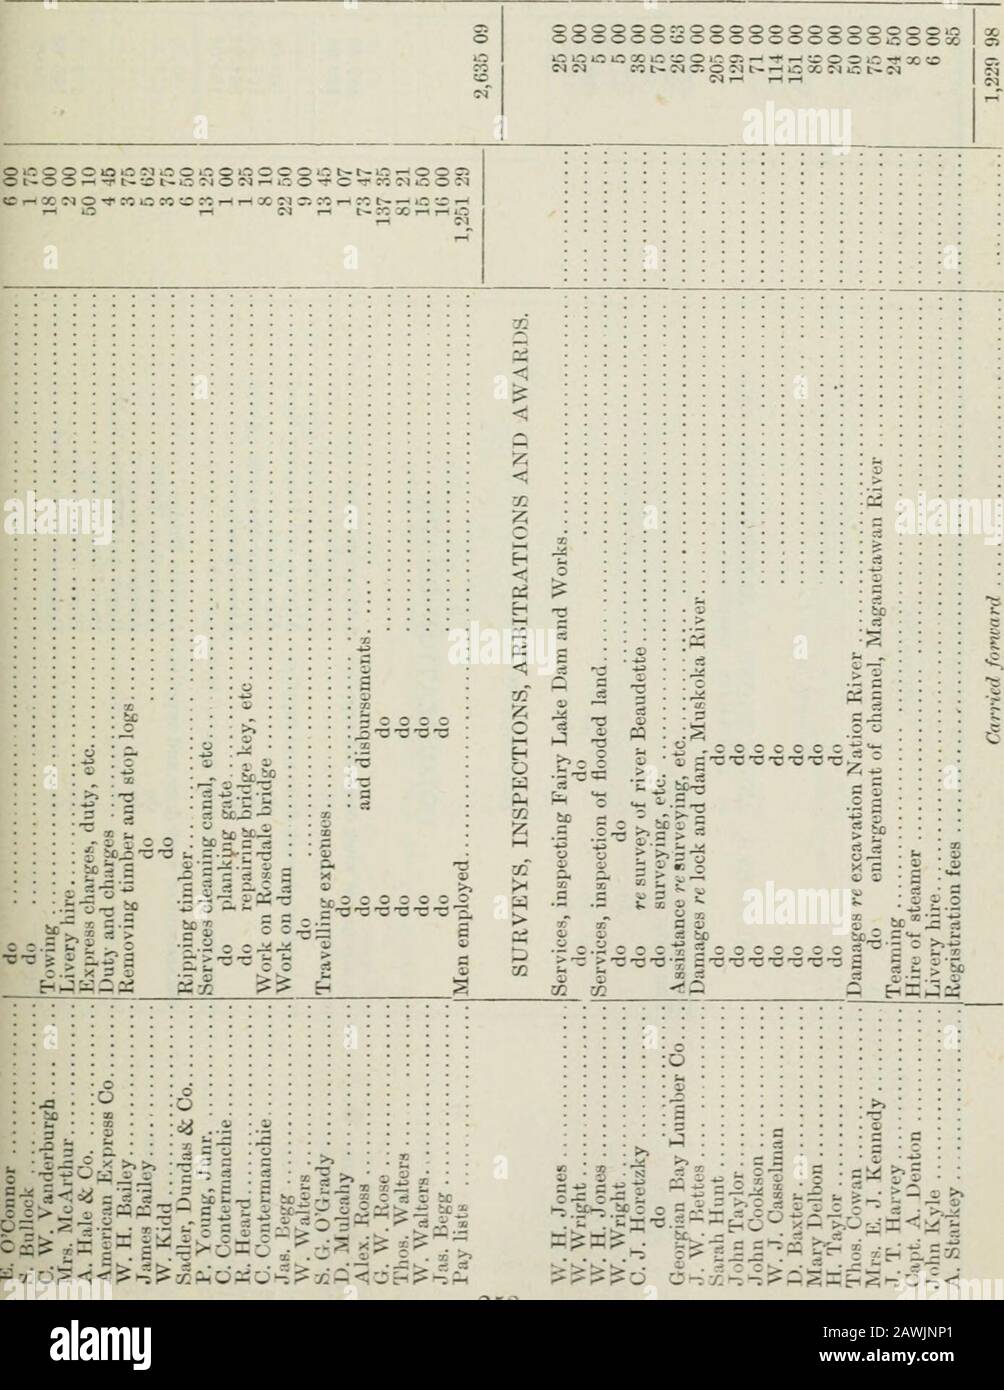 Ontario Sessional Papers, 1887, No.15-20 . ,30 Victoria. Sessional Papers (No. 15). A. 1887. 253 50 Victoria. Sessional Papers (No. 15). A. i»87 I ^ ;2;oI—I H&lt; m 3&lt;1  .a CO I oa CO t-O O O O CO rs -* t-CO c&lt;5 CO in 00 CO 1-1 rH o c-i :o in ; 02 op^ ^o I—I H ts] I—I oo Q o P5 c3 ^ -Tufas c3 cSTJS- C rt ^ fO -r; Ph .- 3 ^ iu o ®° S £ ? tc :^ t. &lt;i&lt;5&lt;;^ ?» t. c3 h f4P^dS o^ o 254 c; iJ t; cs g ^ 7:? to S ;3^, ce^ ;:lLr o a.P? 1-5 Ph i-s O ^l l&gt; 02 50 Victoria. Sessional Papers (No. 15). A. 1887 8SS ! .-I iM CO t- C-l M cc rc O Q o o ? CI ^ do I Mi ?^ =• = H! 00 o c^ o 5 ^ C5 Stock Photo